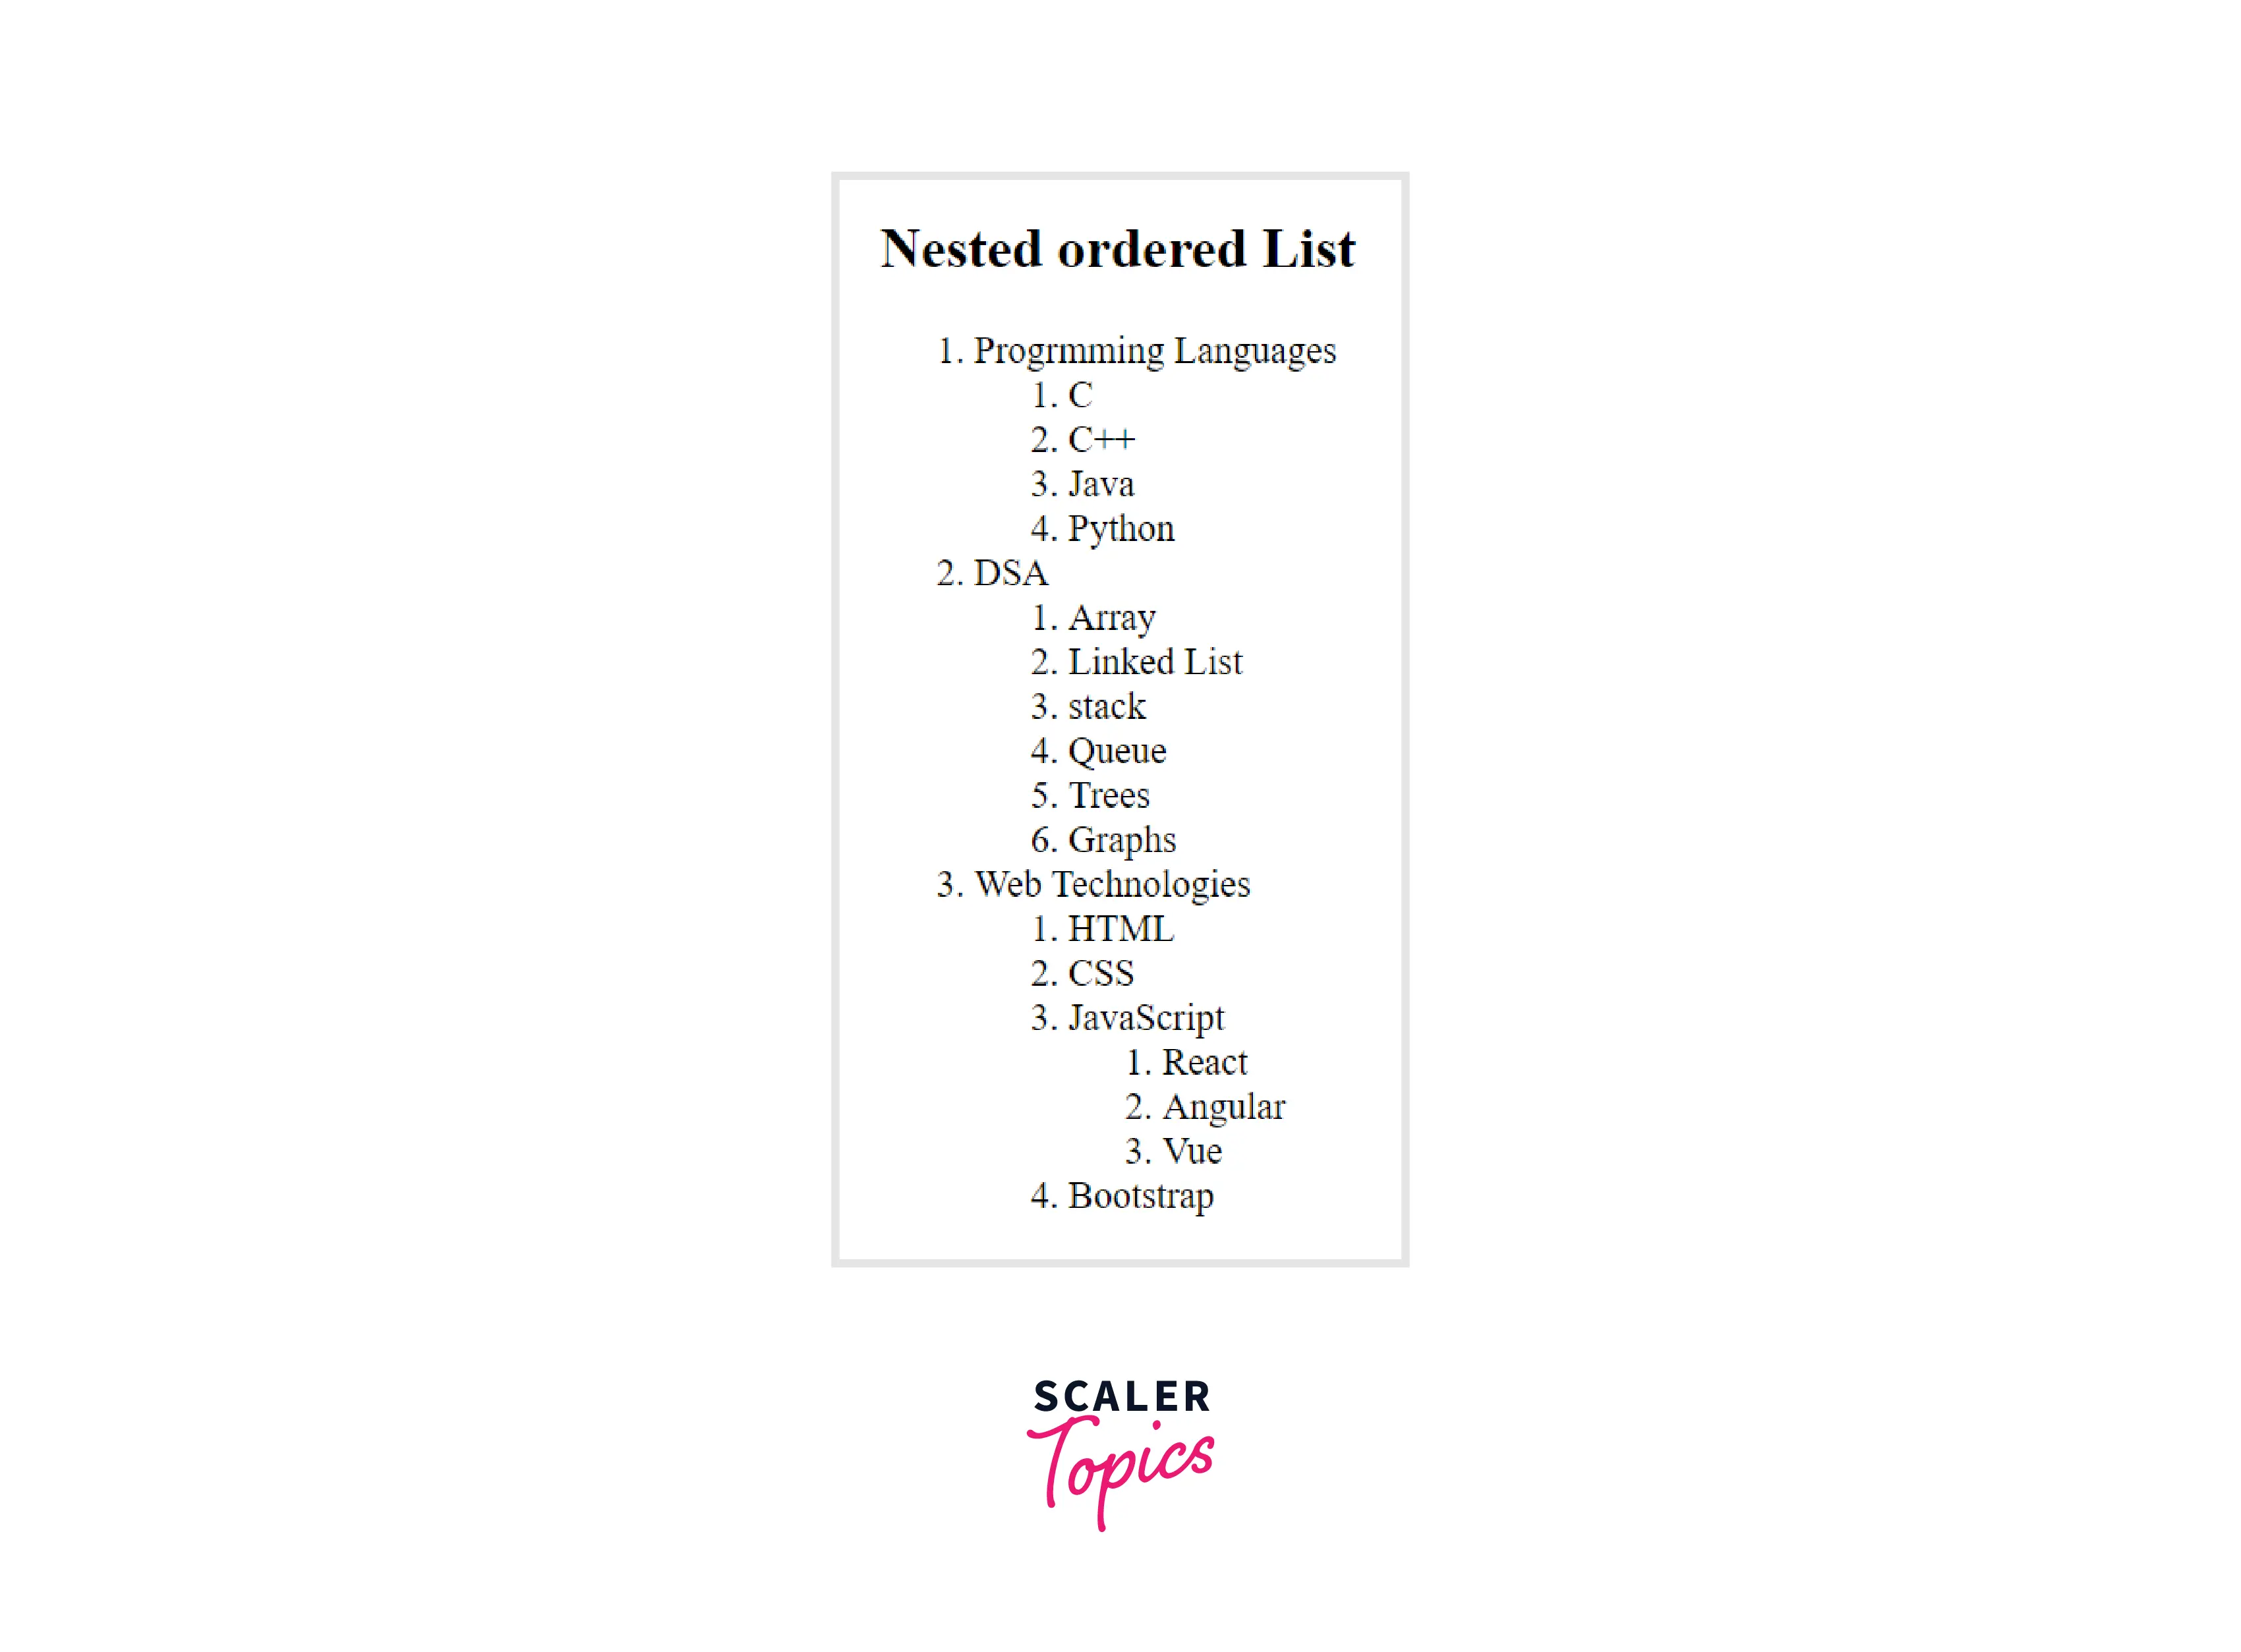 medier kokain Kabelbane How to Create a Nested List in HTML? - Scaler Topics